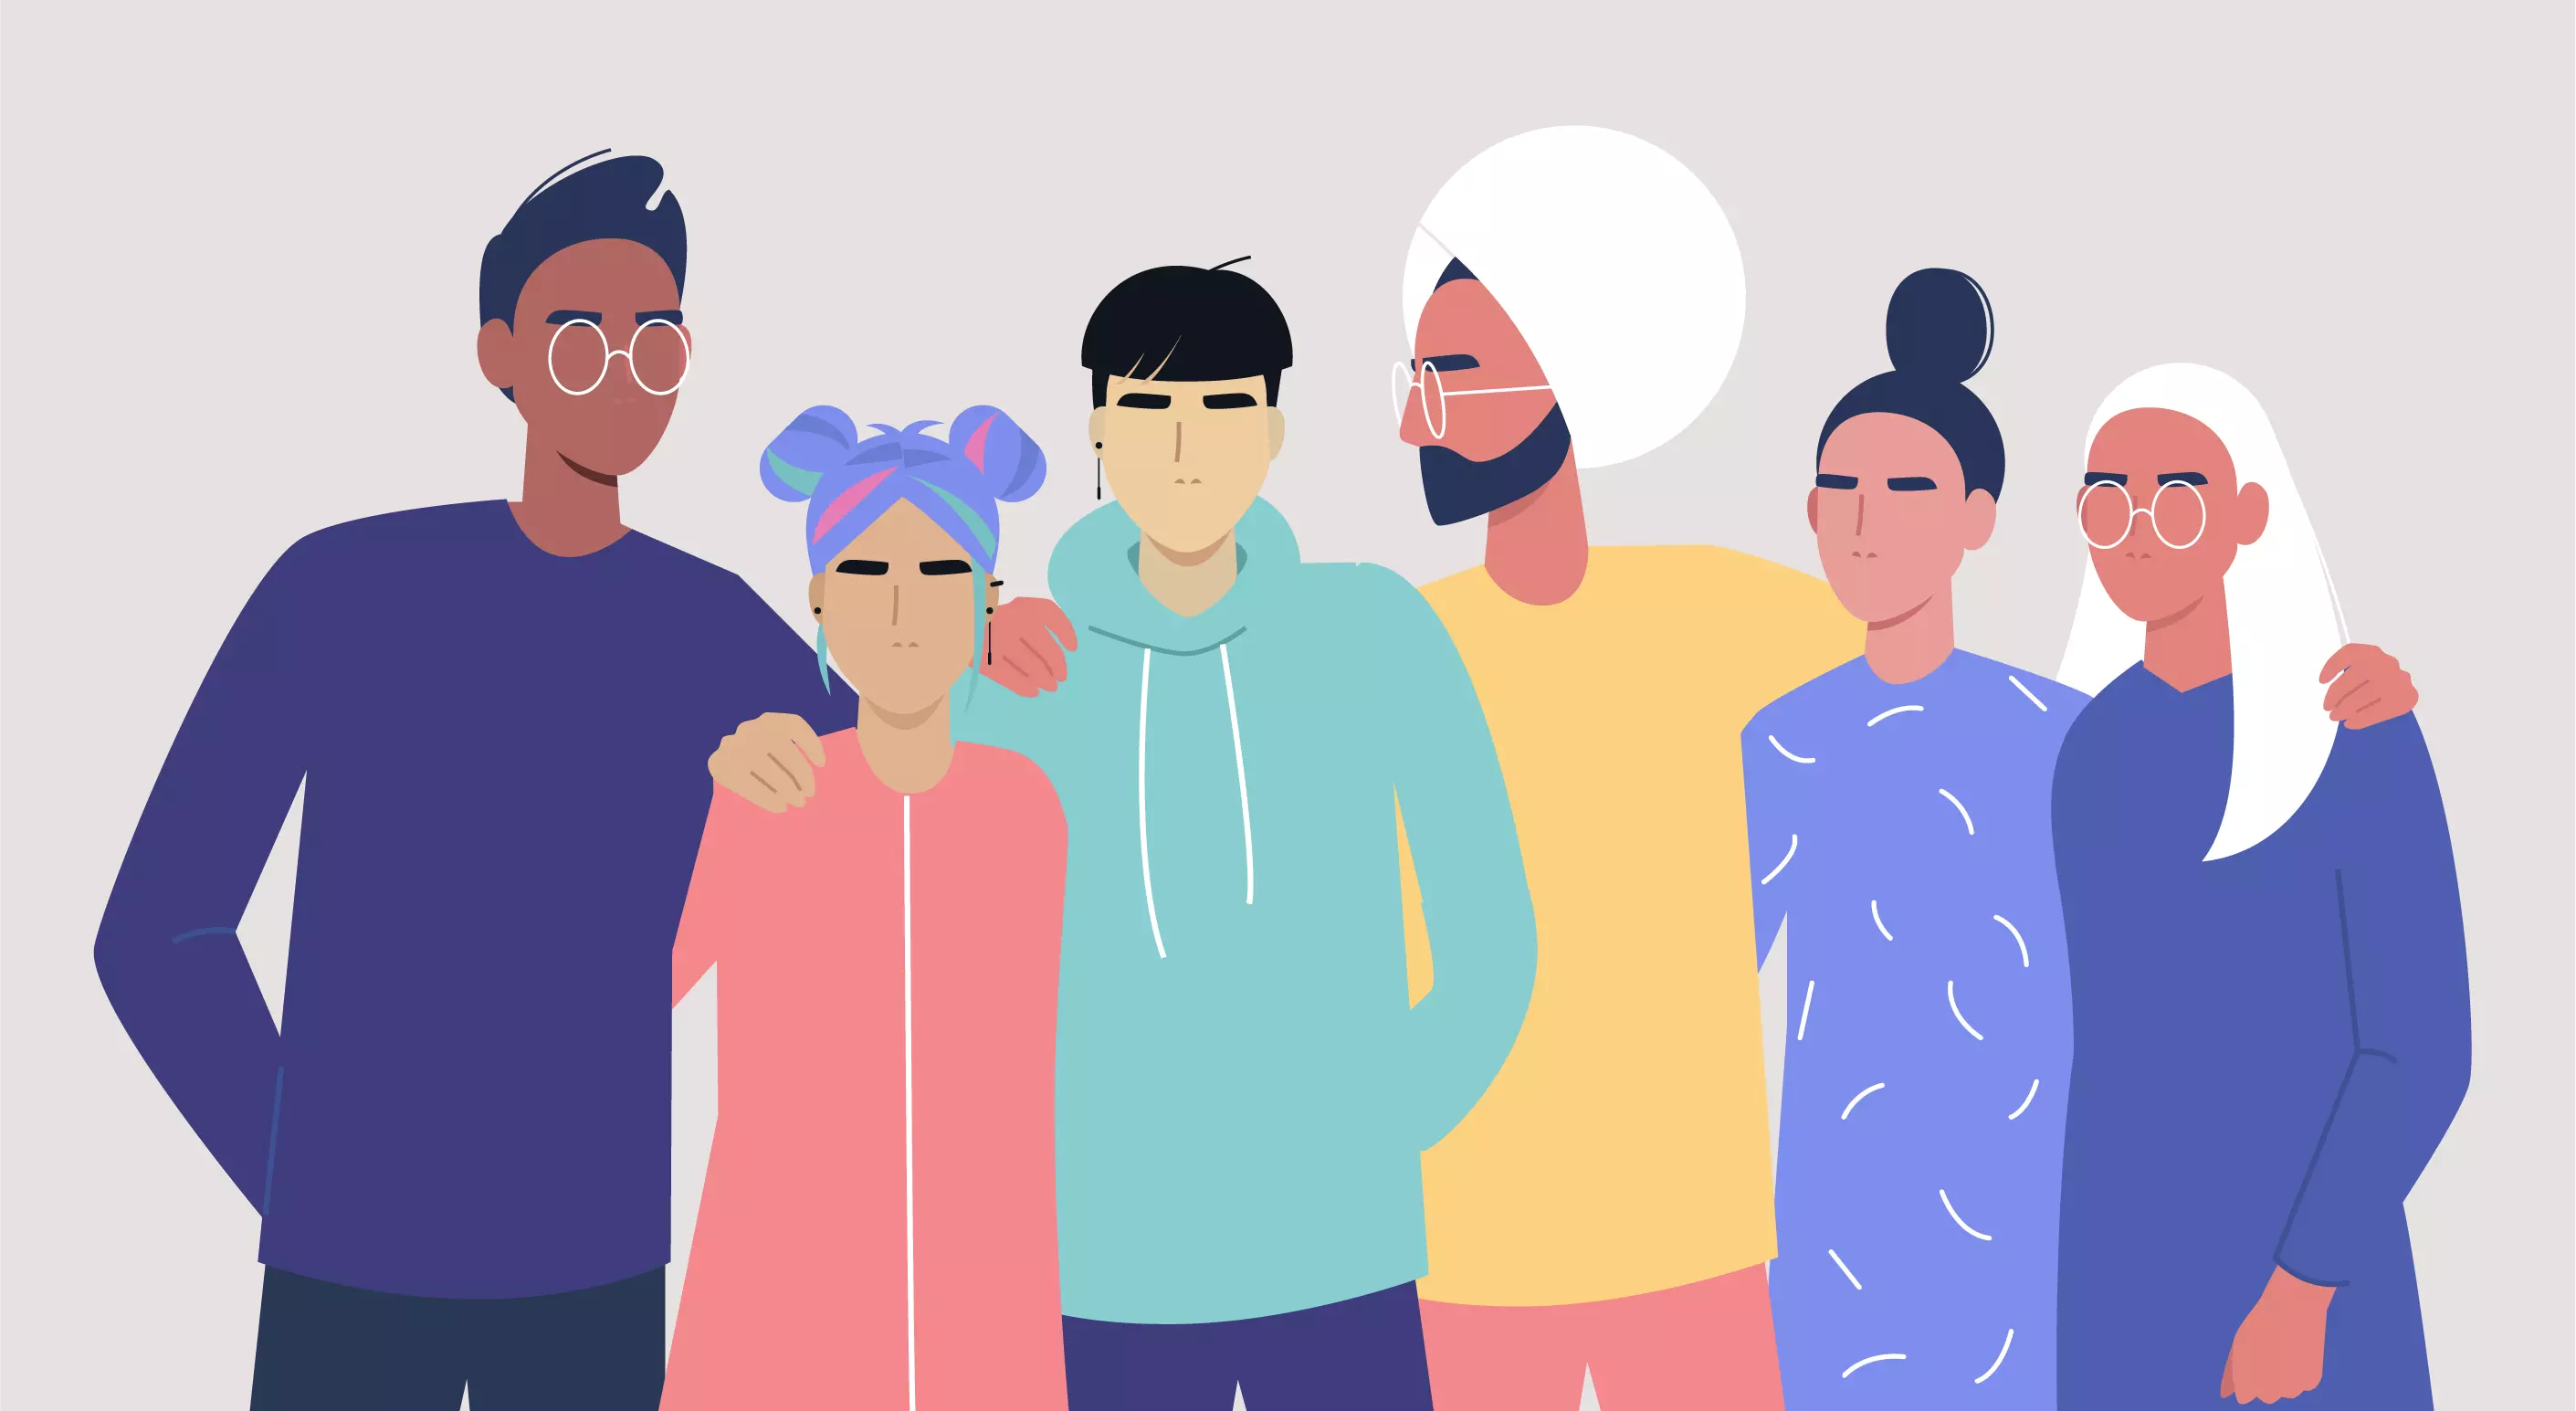 Illustration of people representing mixed genders and ethnicities standing together